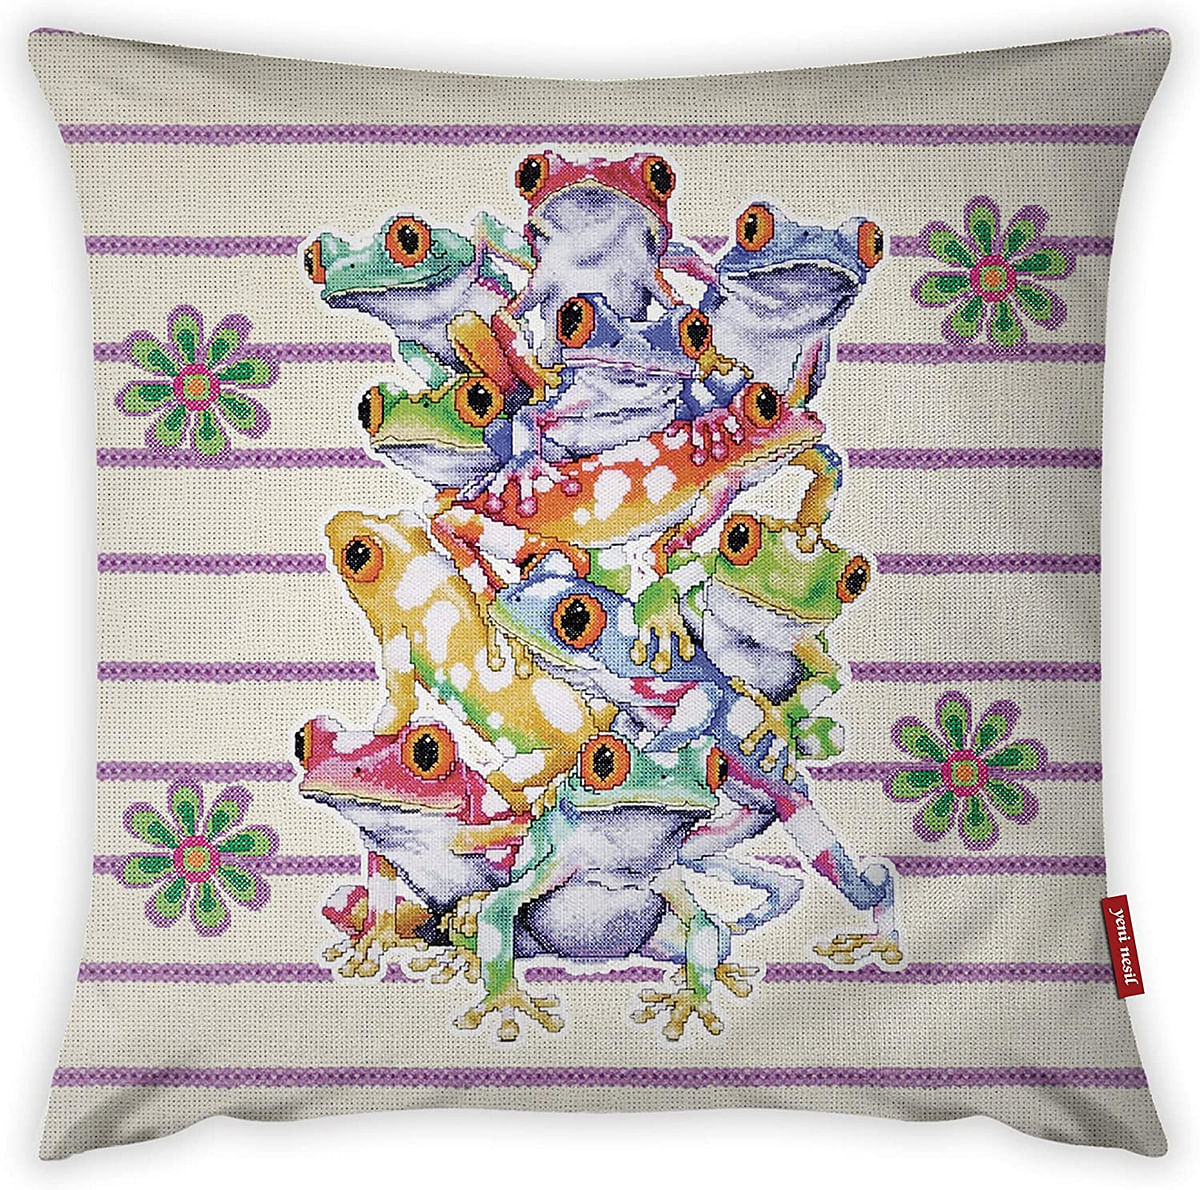 Mon Desire Double Side Printed Decorative Throw Pillow Cover (No Filling Inside), Multi-Colour, 44 x 44 cm, MDSYST4963